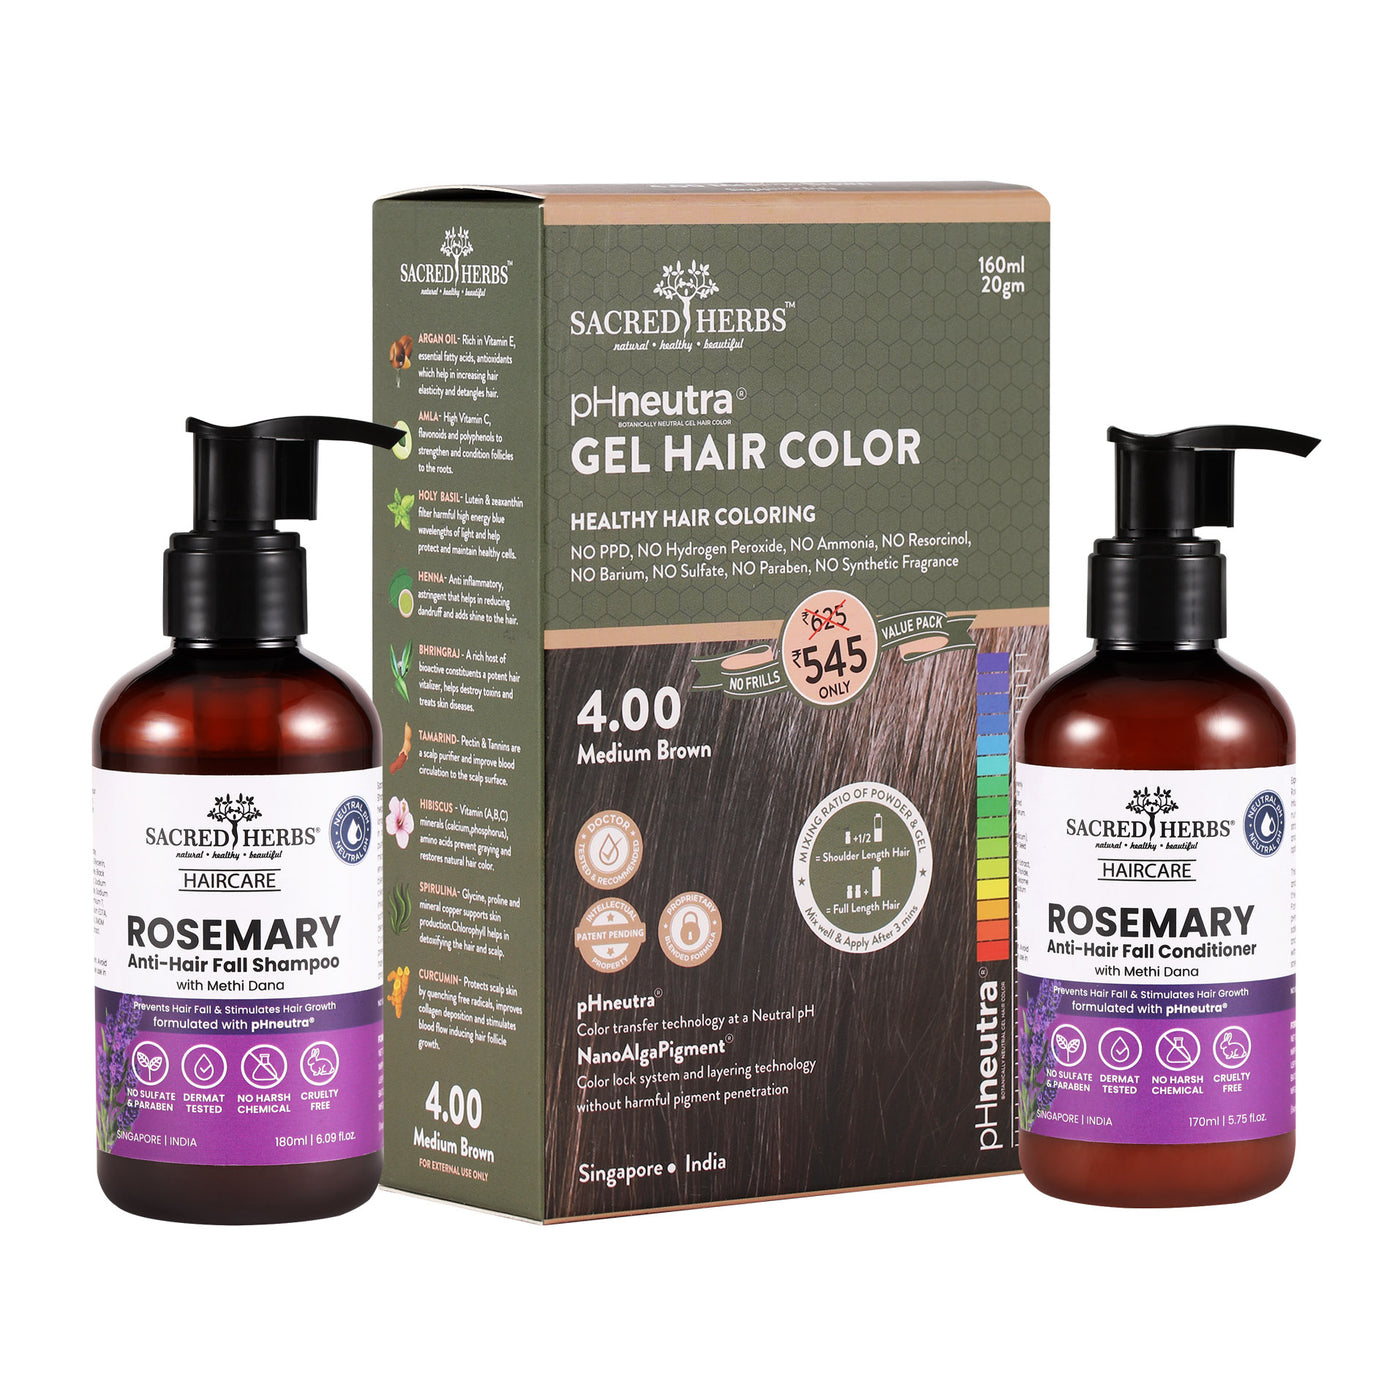 Rosemary Methi Dana Hair Care : Complete Hair Color Value Pack